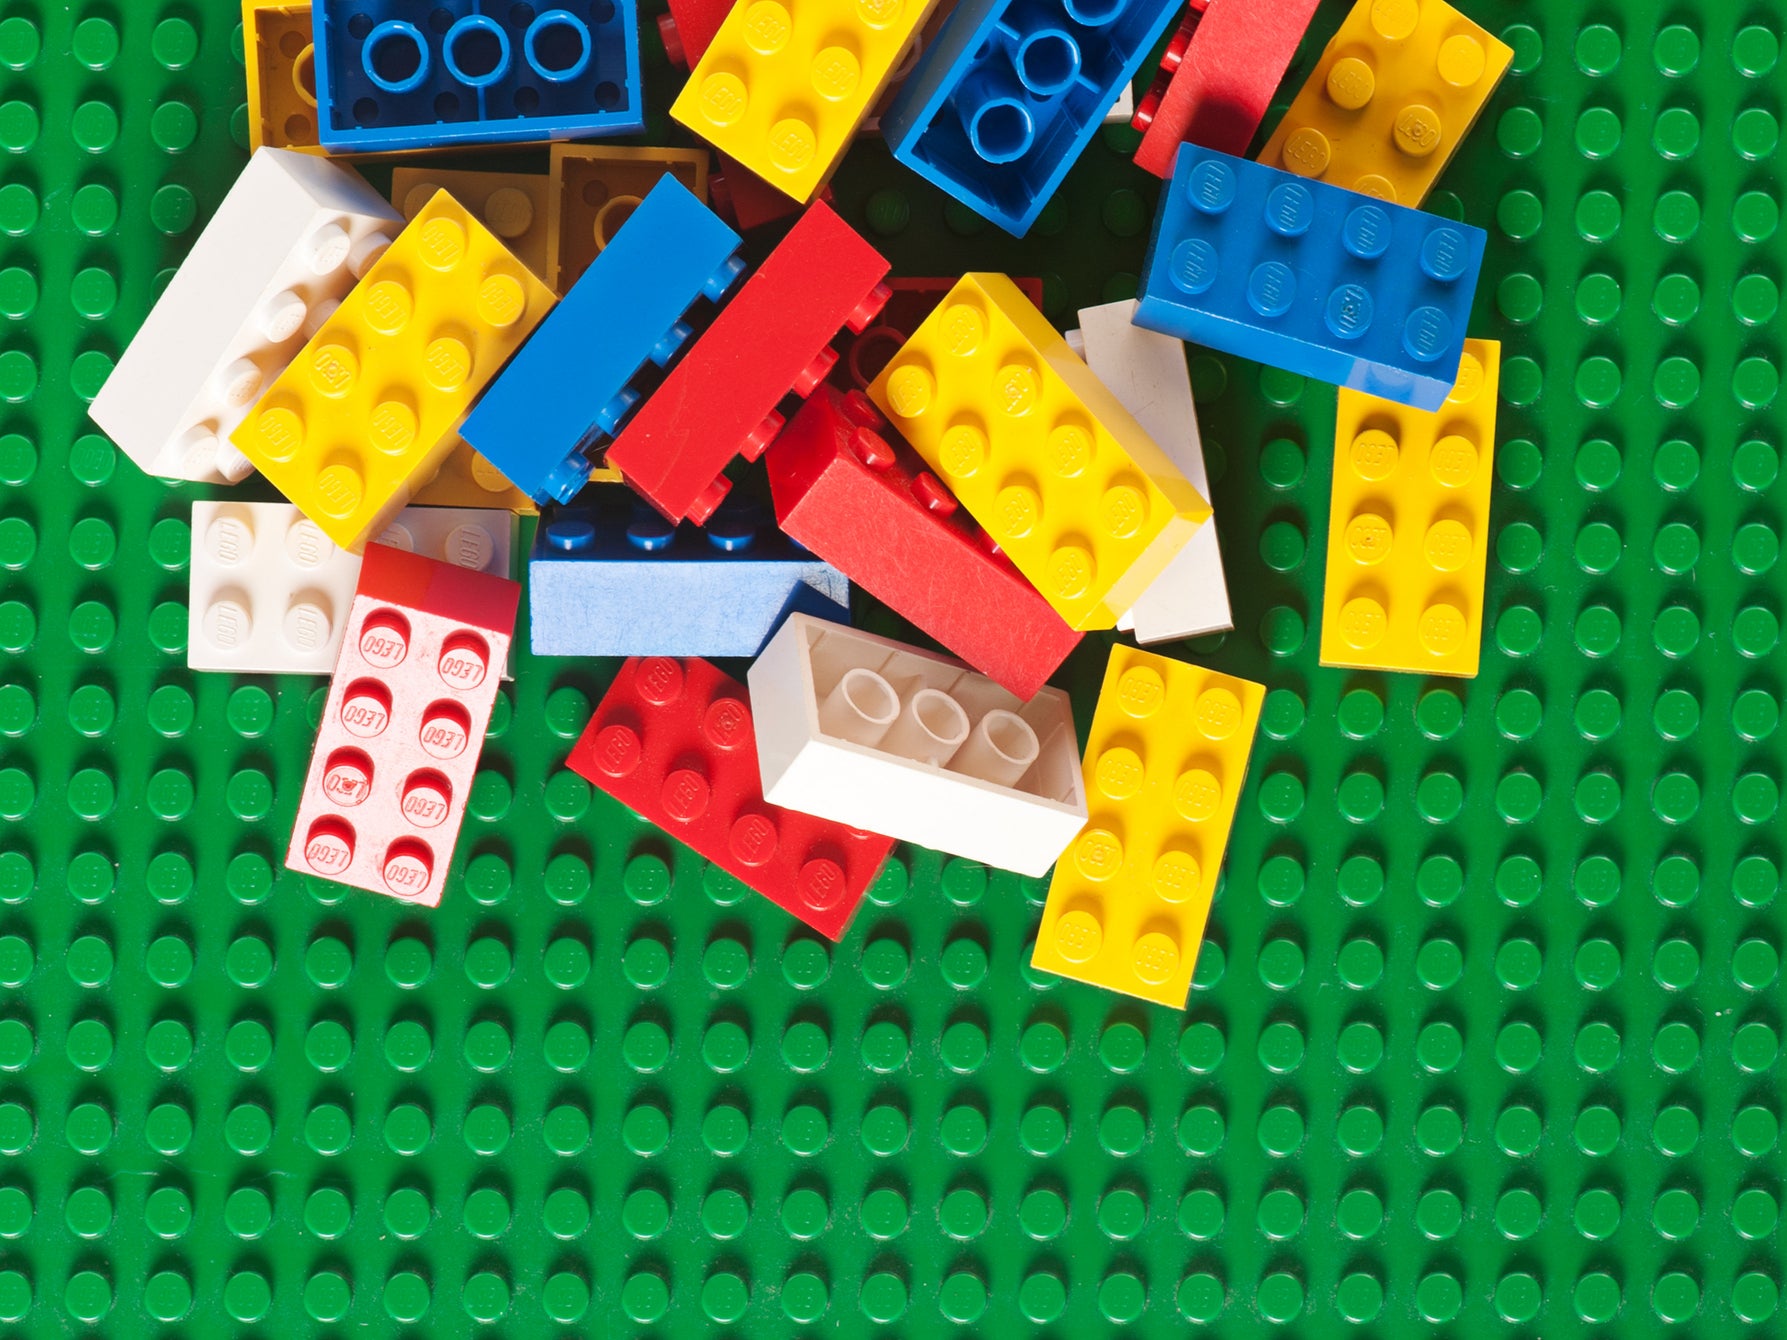 Lego is going greener by recycling waste plastic to make new blocks